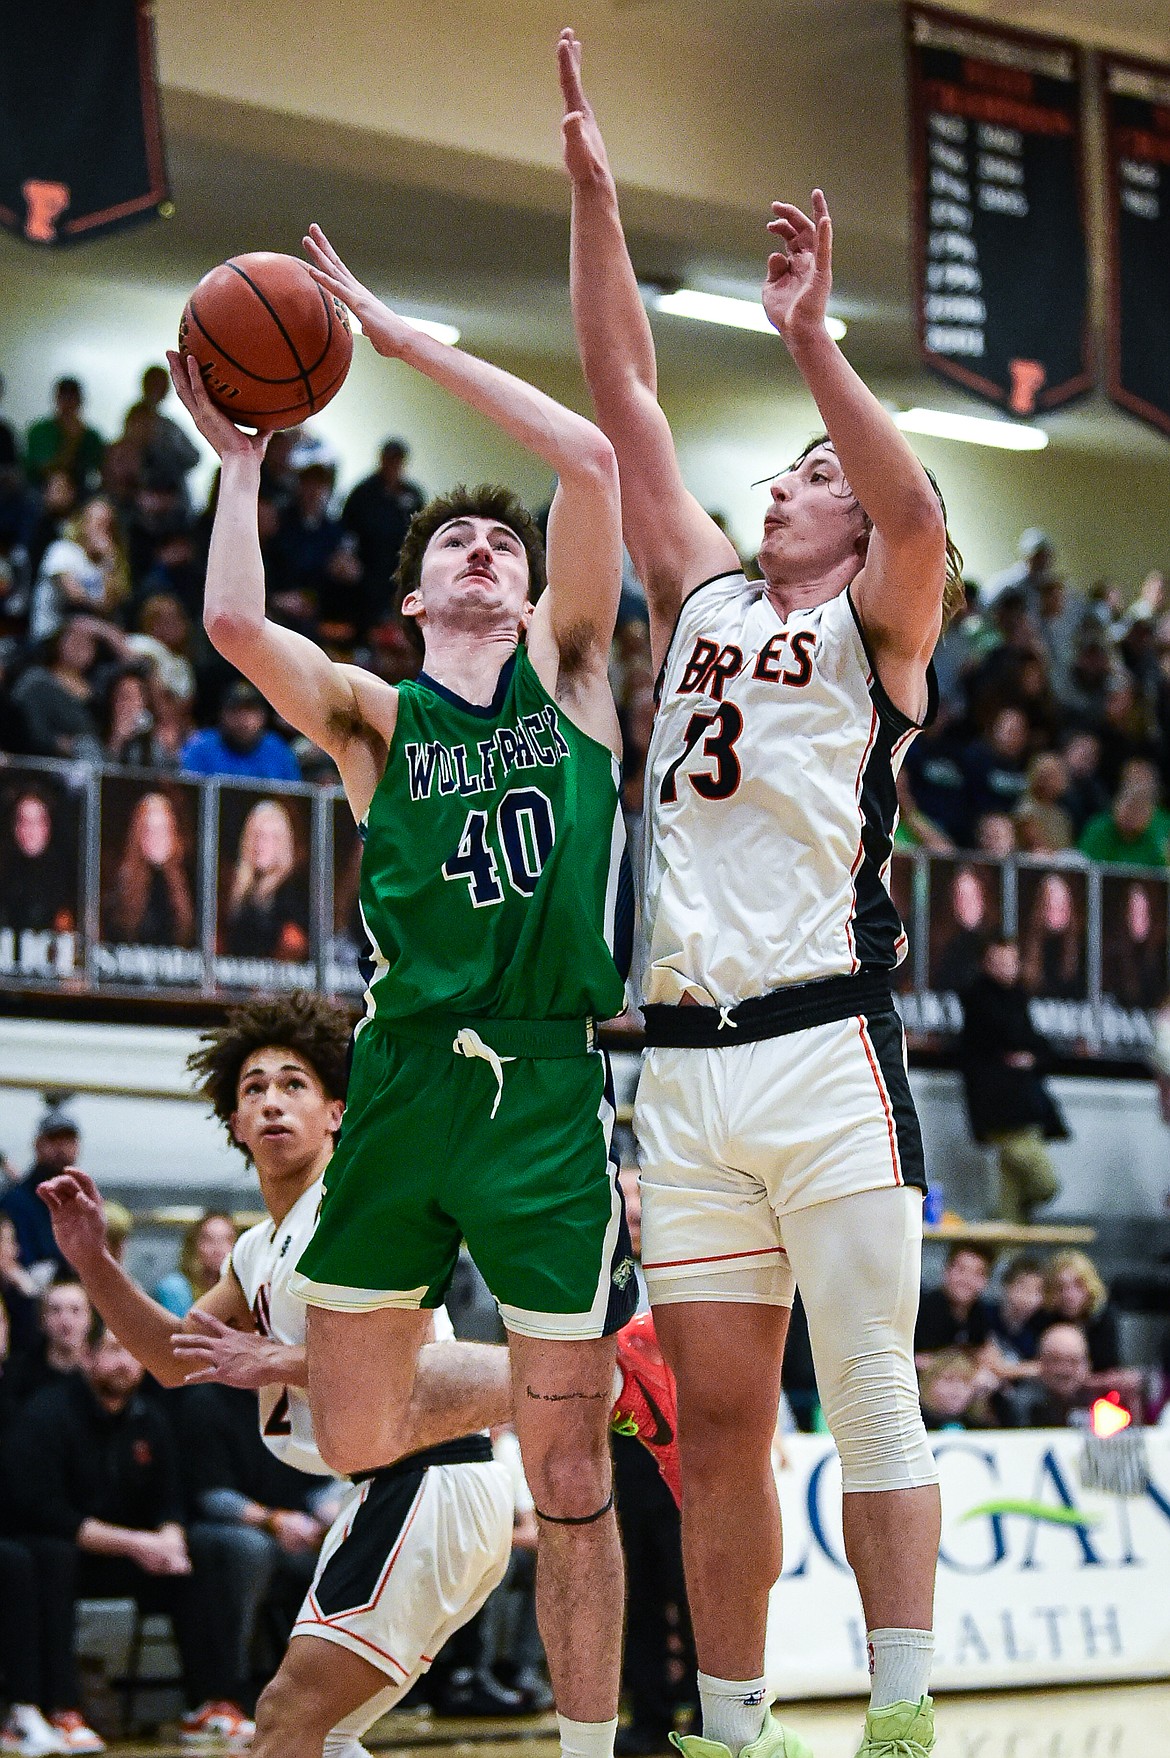 Glacier's Noah Cummings (40) drives to the basket guarded by Flathead's Lyric Ersland (13) in the first half at Flathead High School on Friday, Jan. 19. (Casey Kreider/Daily Inter Lake)